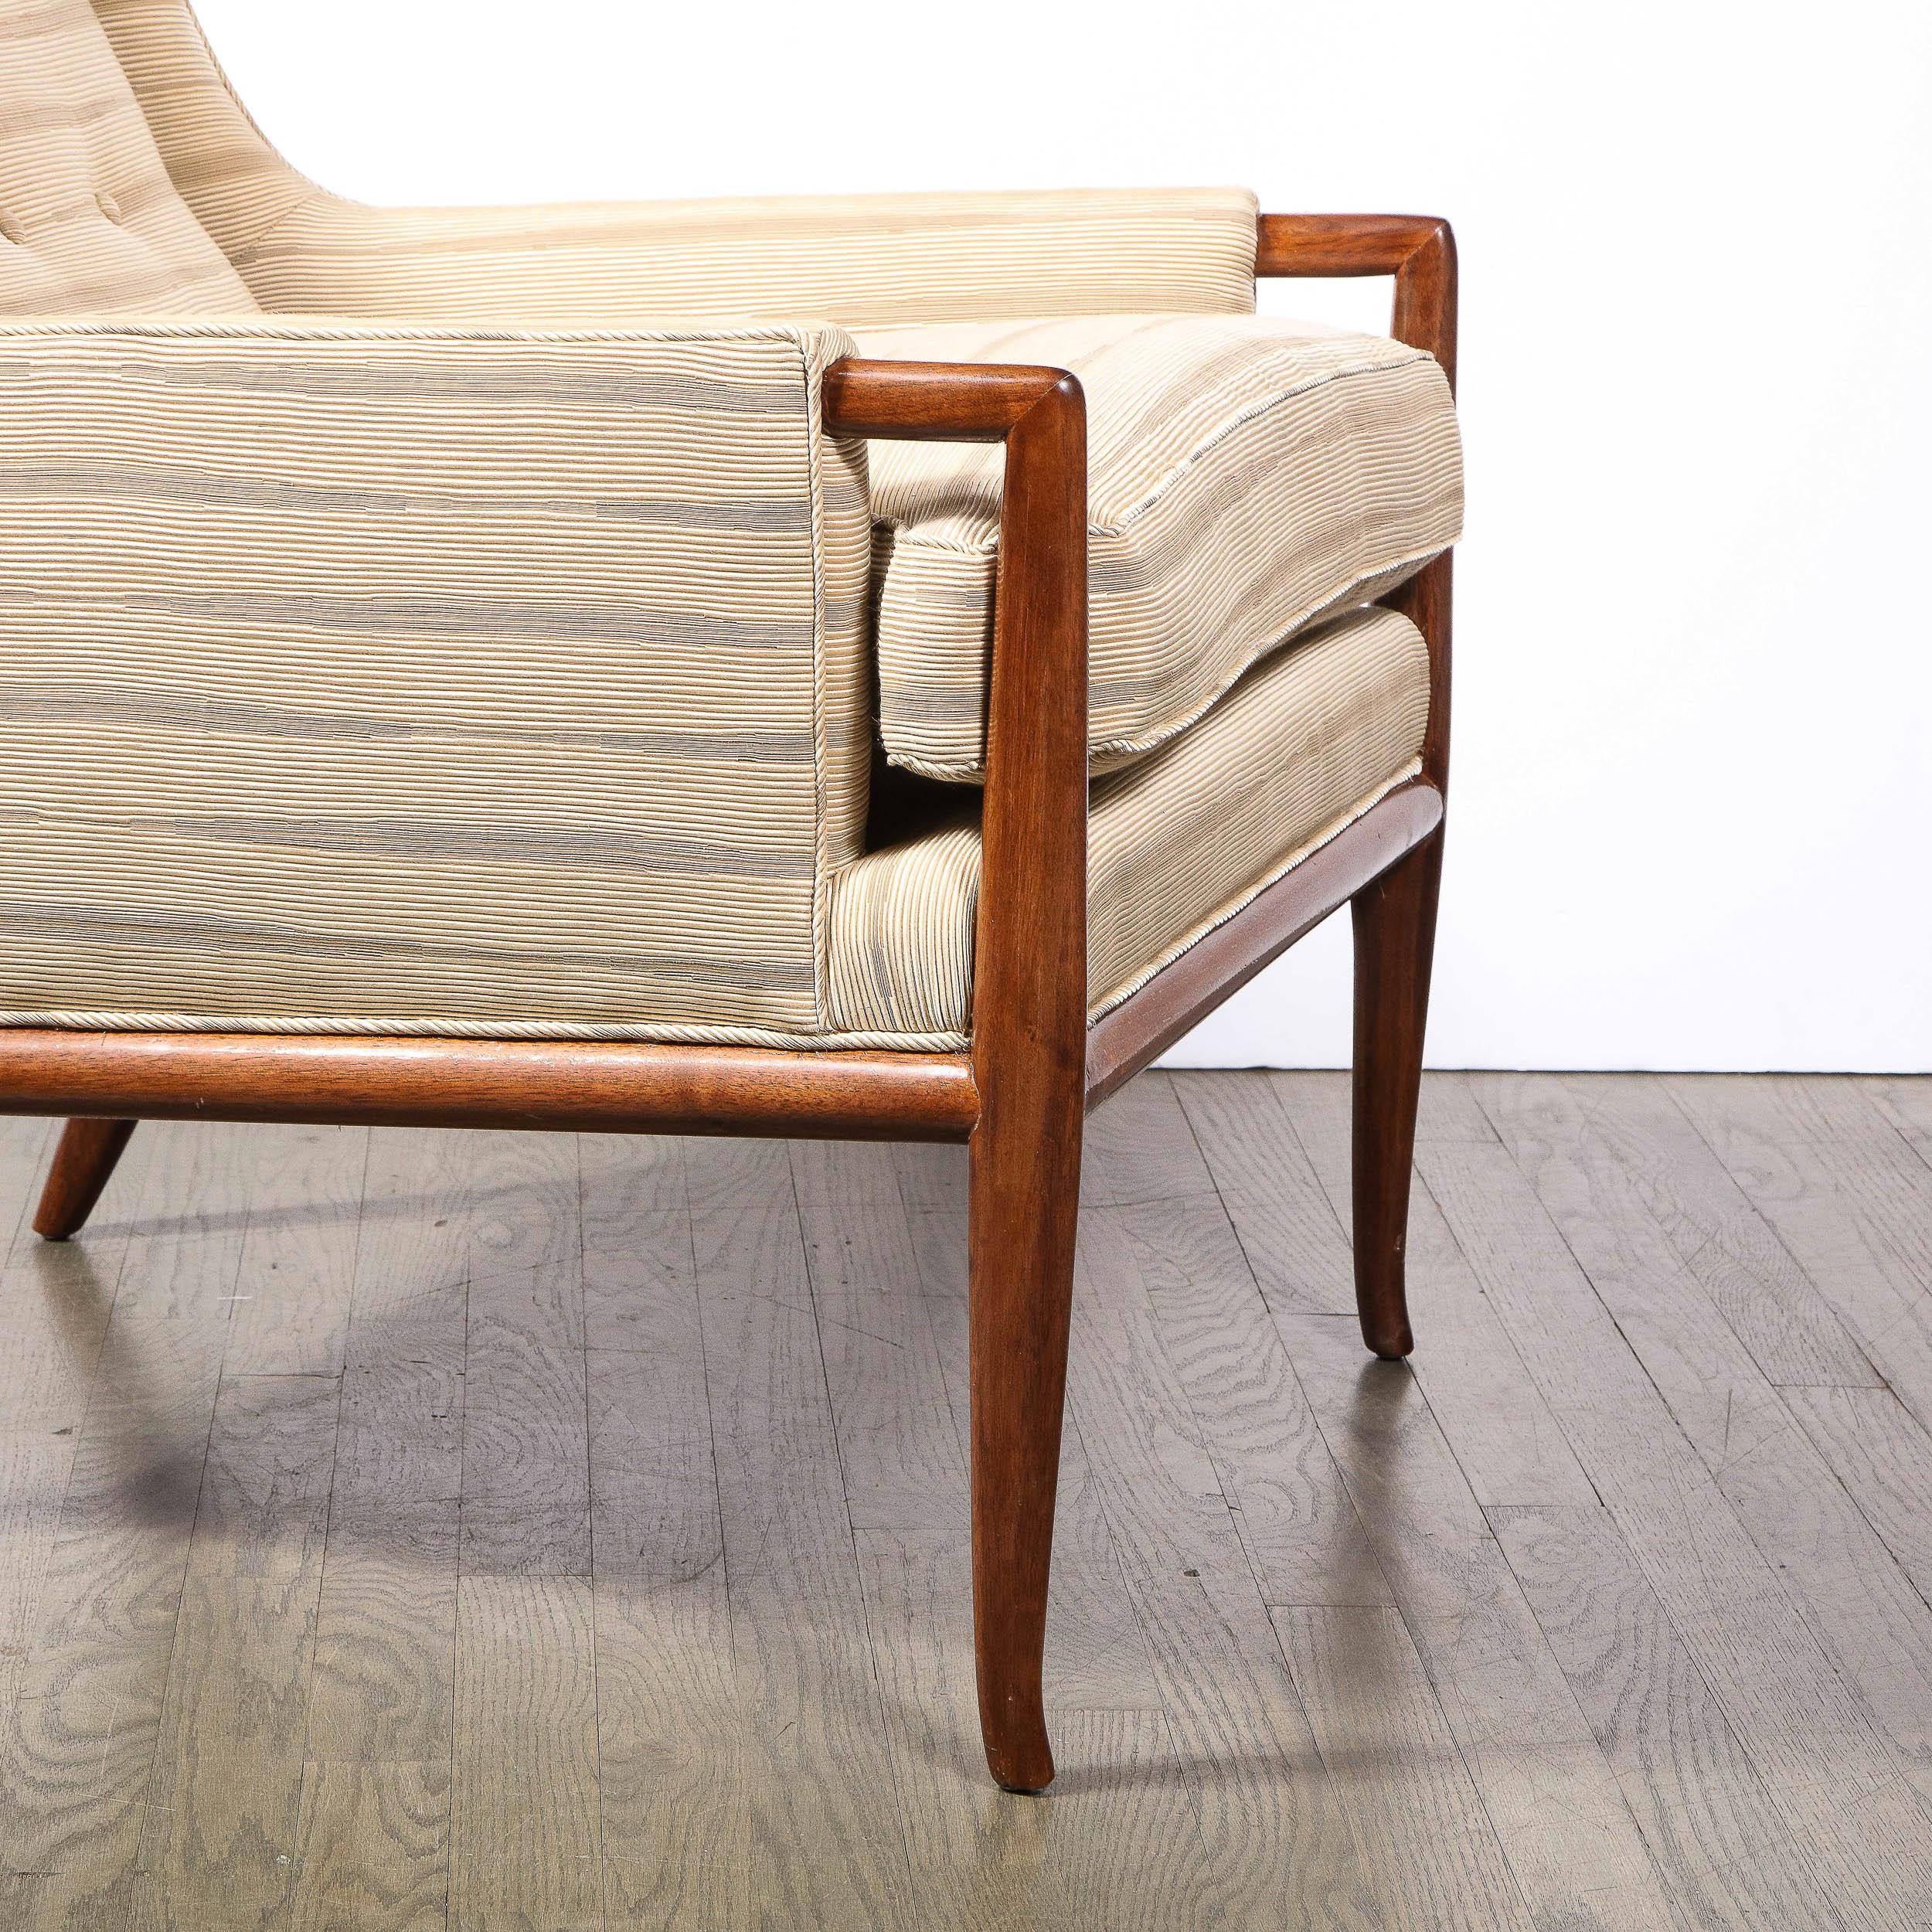 Mid-20th Century Mid-Century Modern Walnut Button Back Arm Chair by Robsjohn-Gibbings For Sale